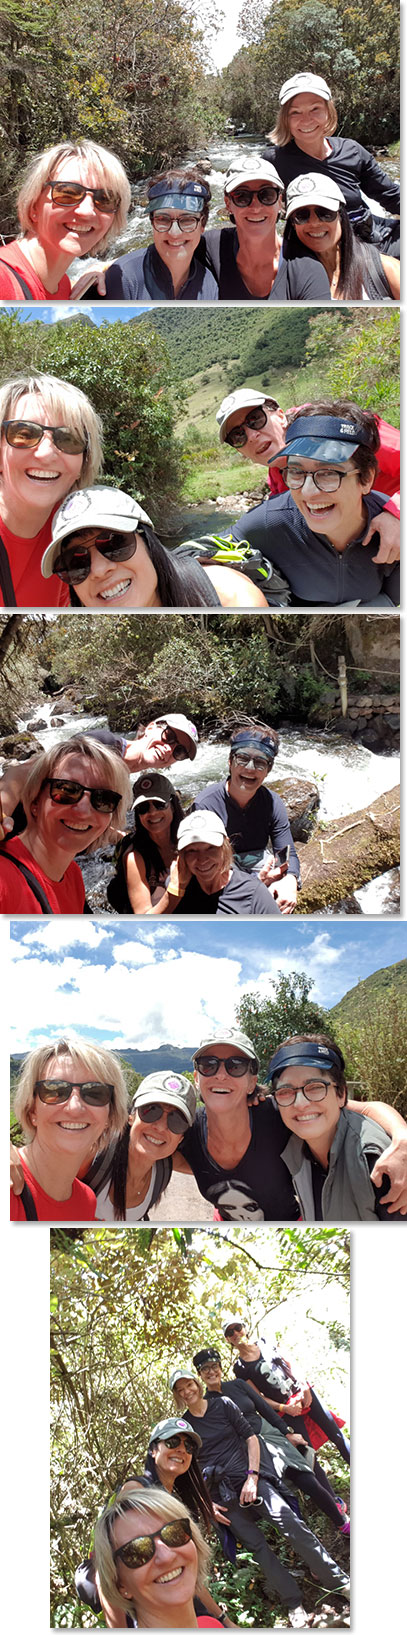 The girls went for a hike around the Termas by the river